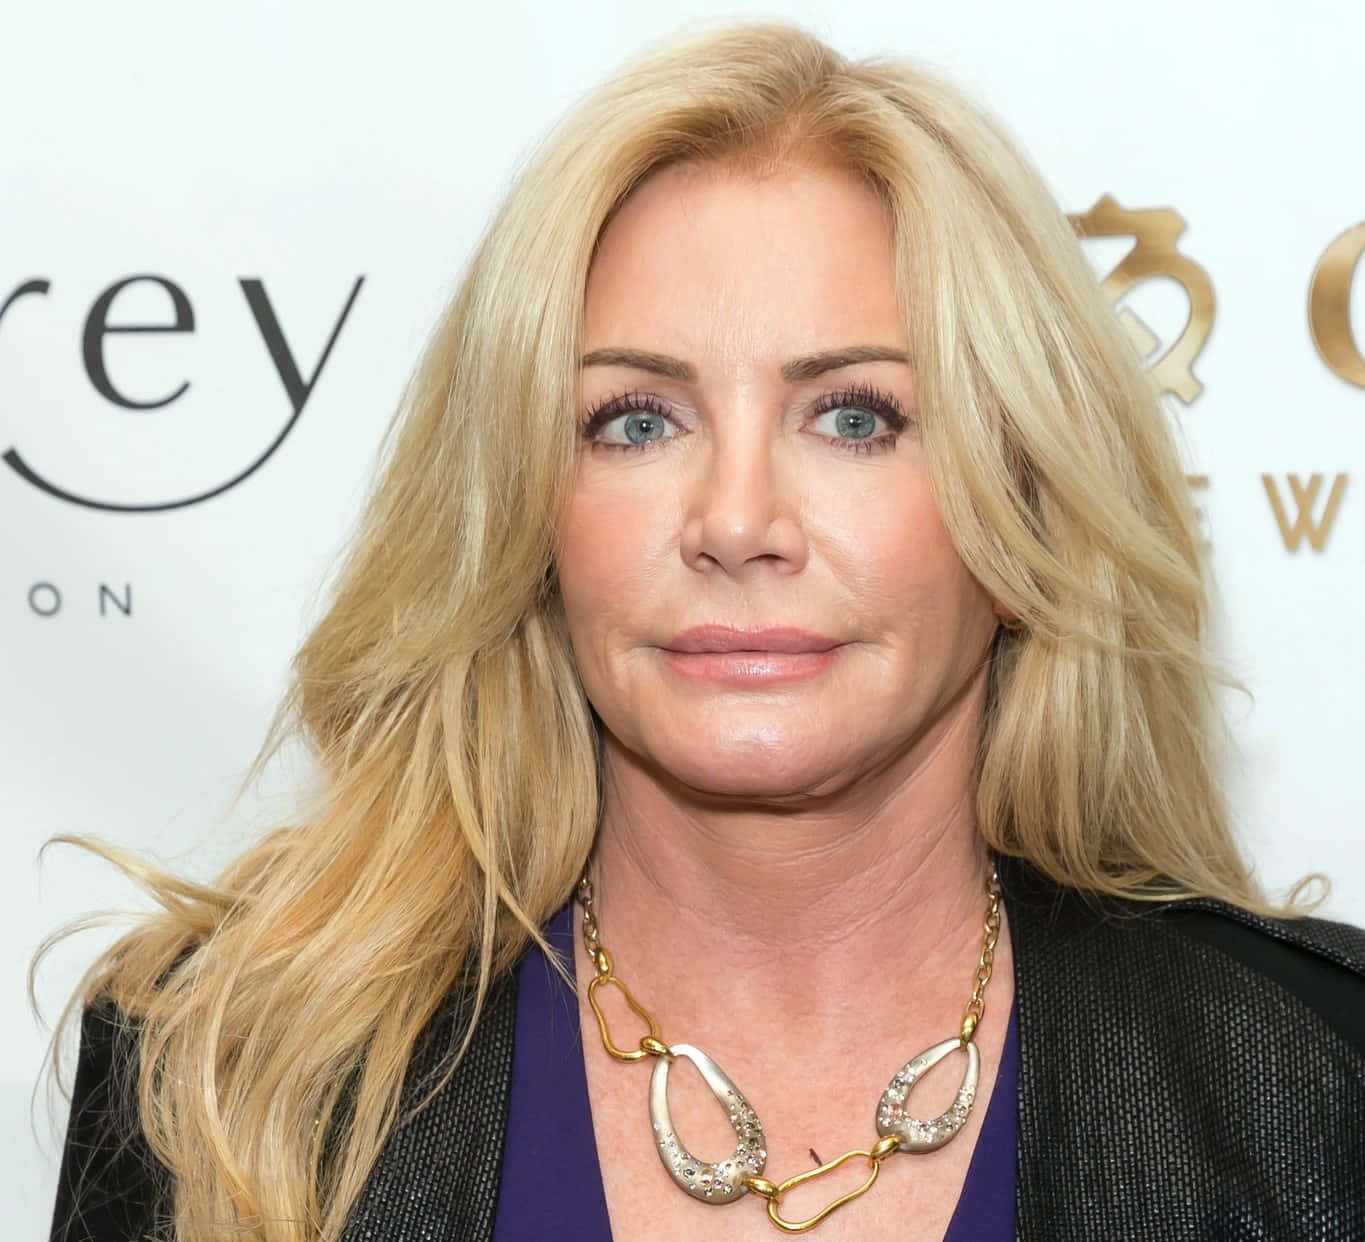 Shannon Tweed Event Appearance Wallpaper